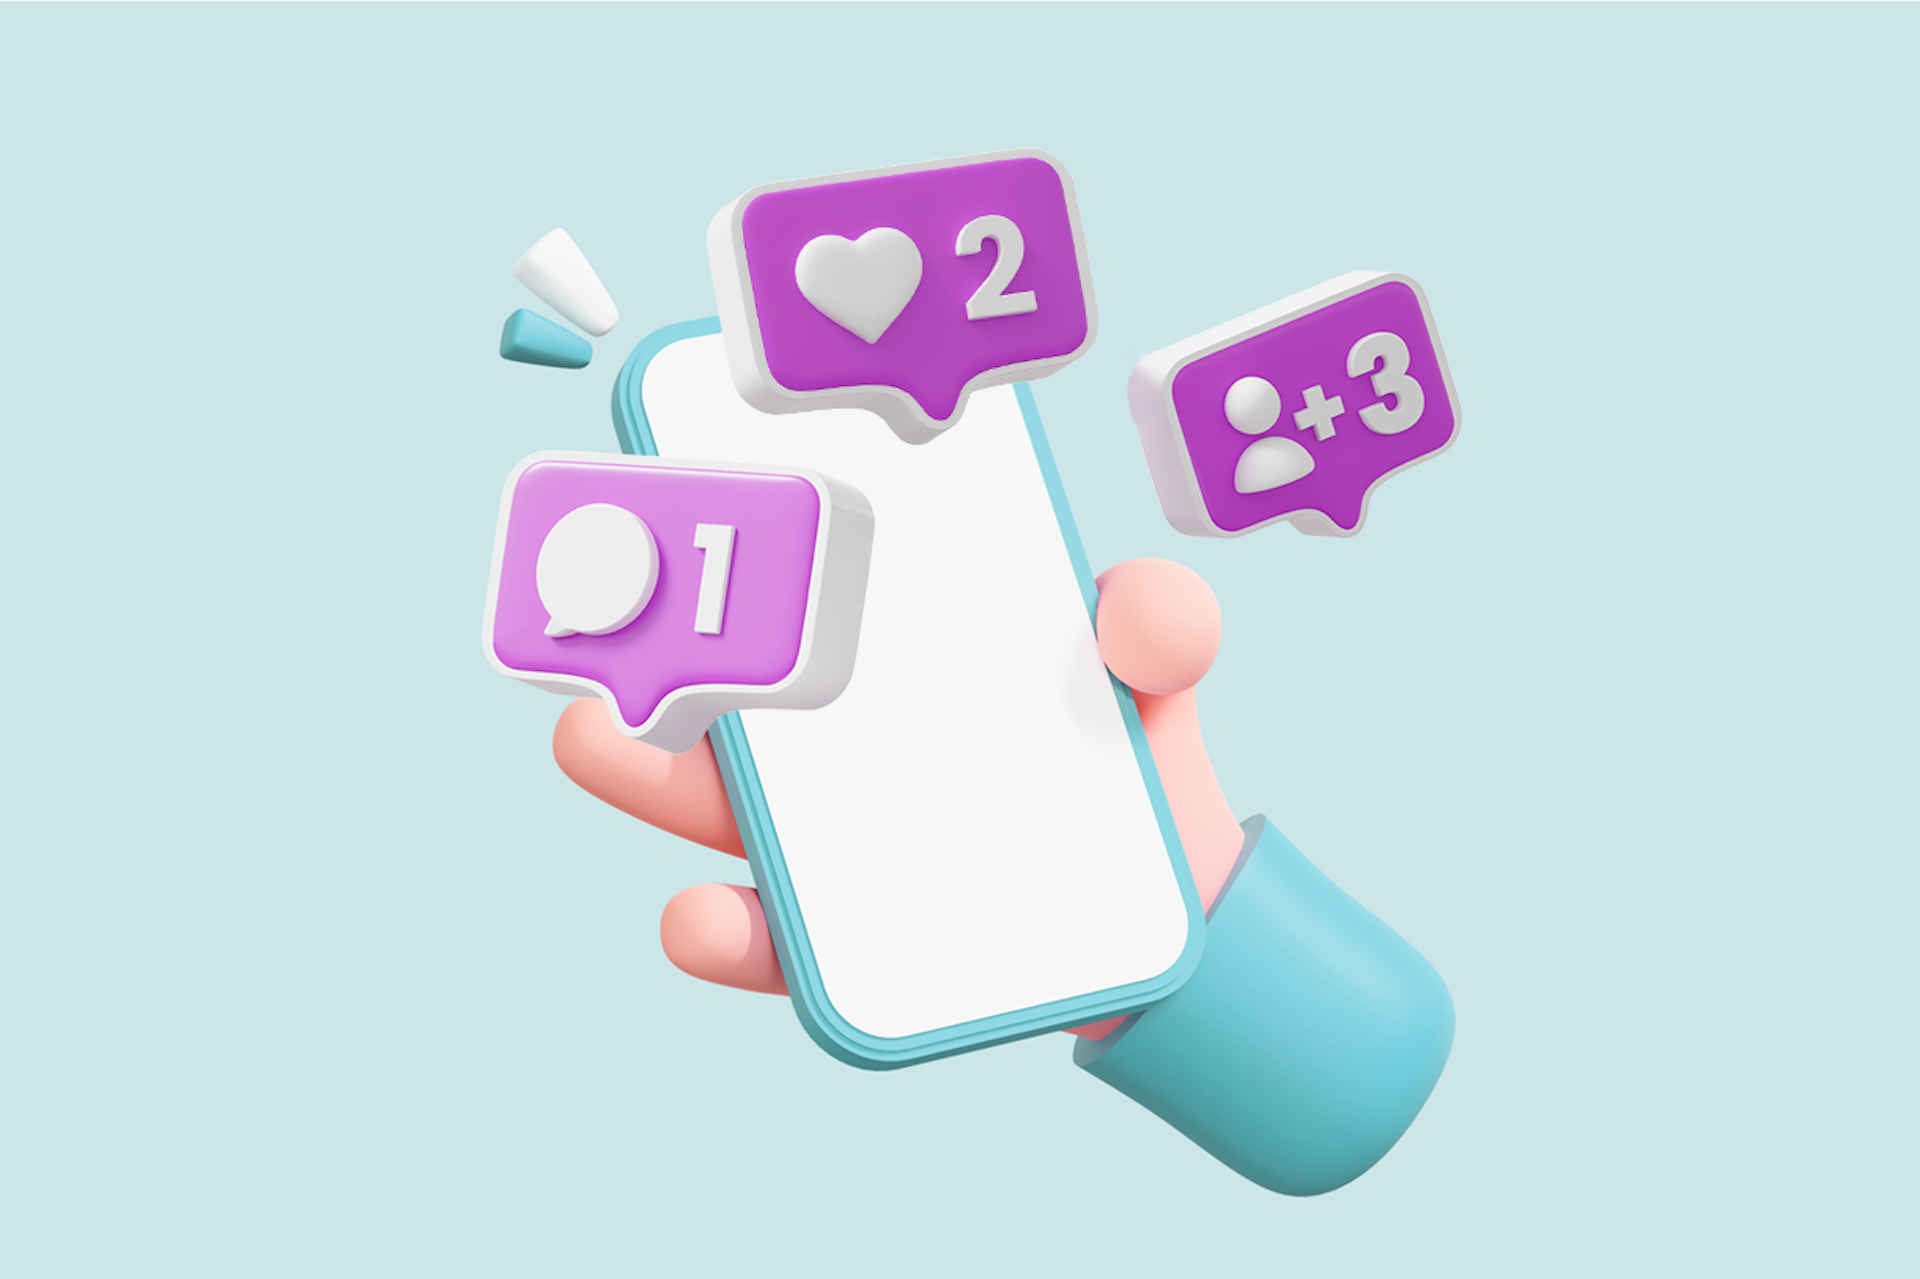 Illustration of a persons hand holding a smartphone surrounded by three notification symbols for likes, comments, and followers. Influencer marketing blog ultimate guide.